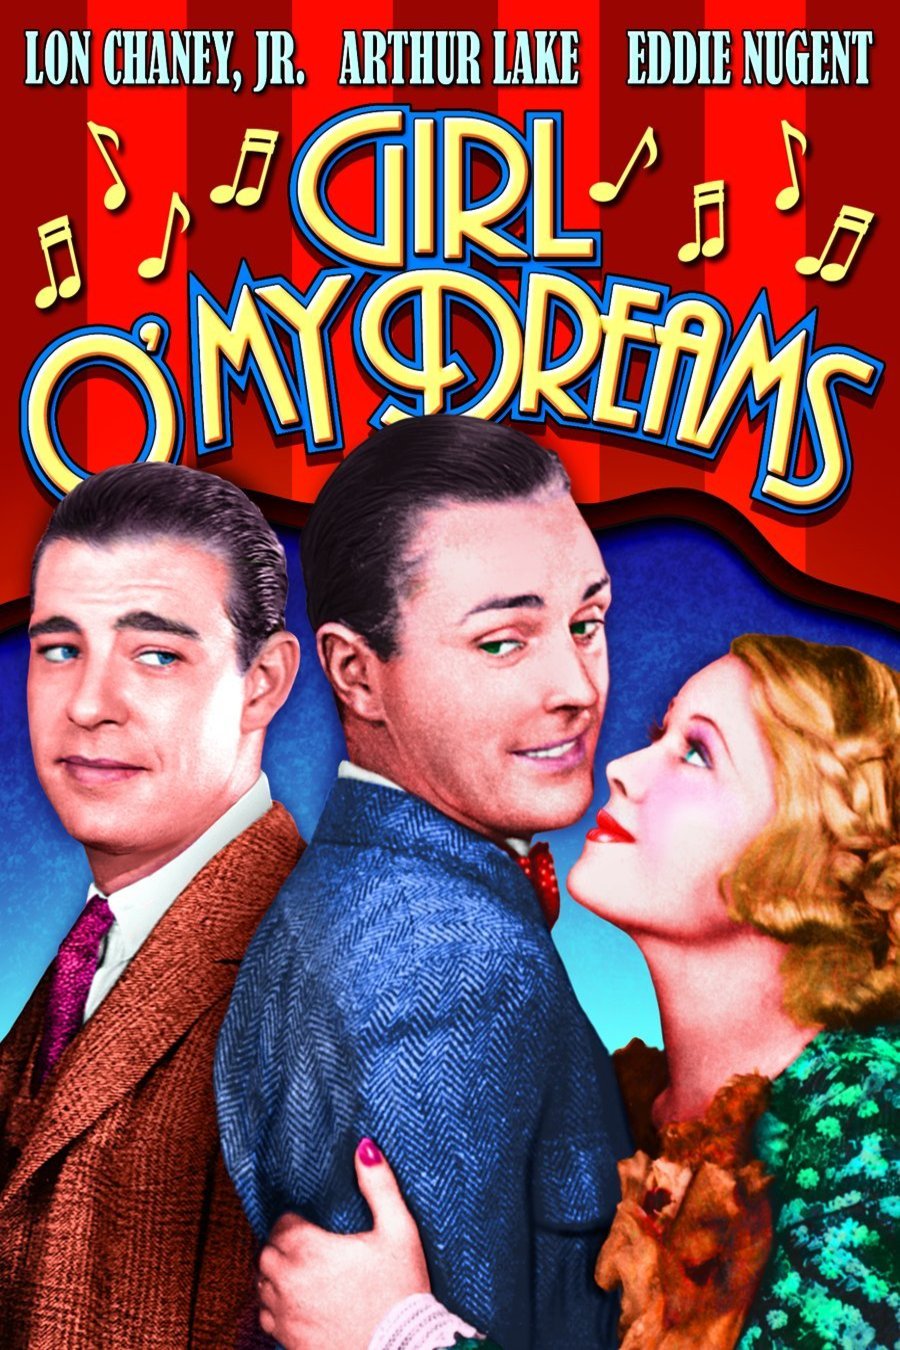 Poster of the movie Girl O' My Dreams